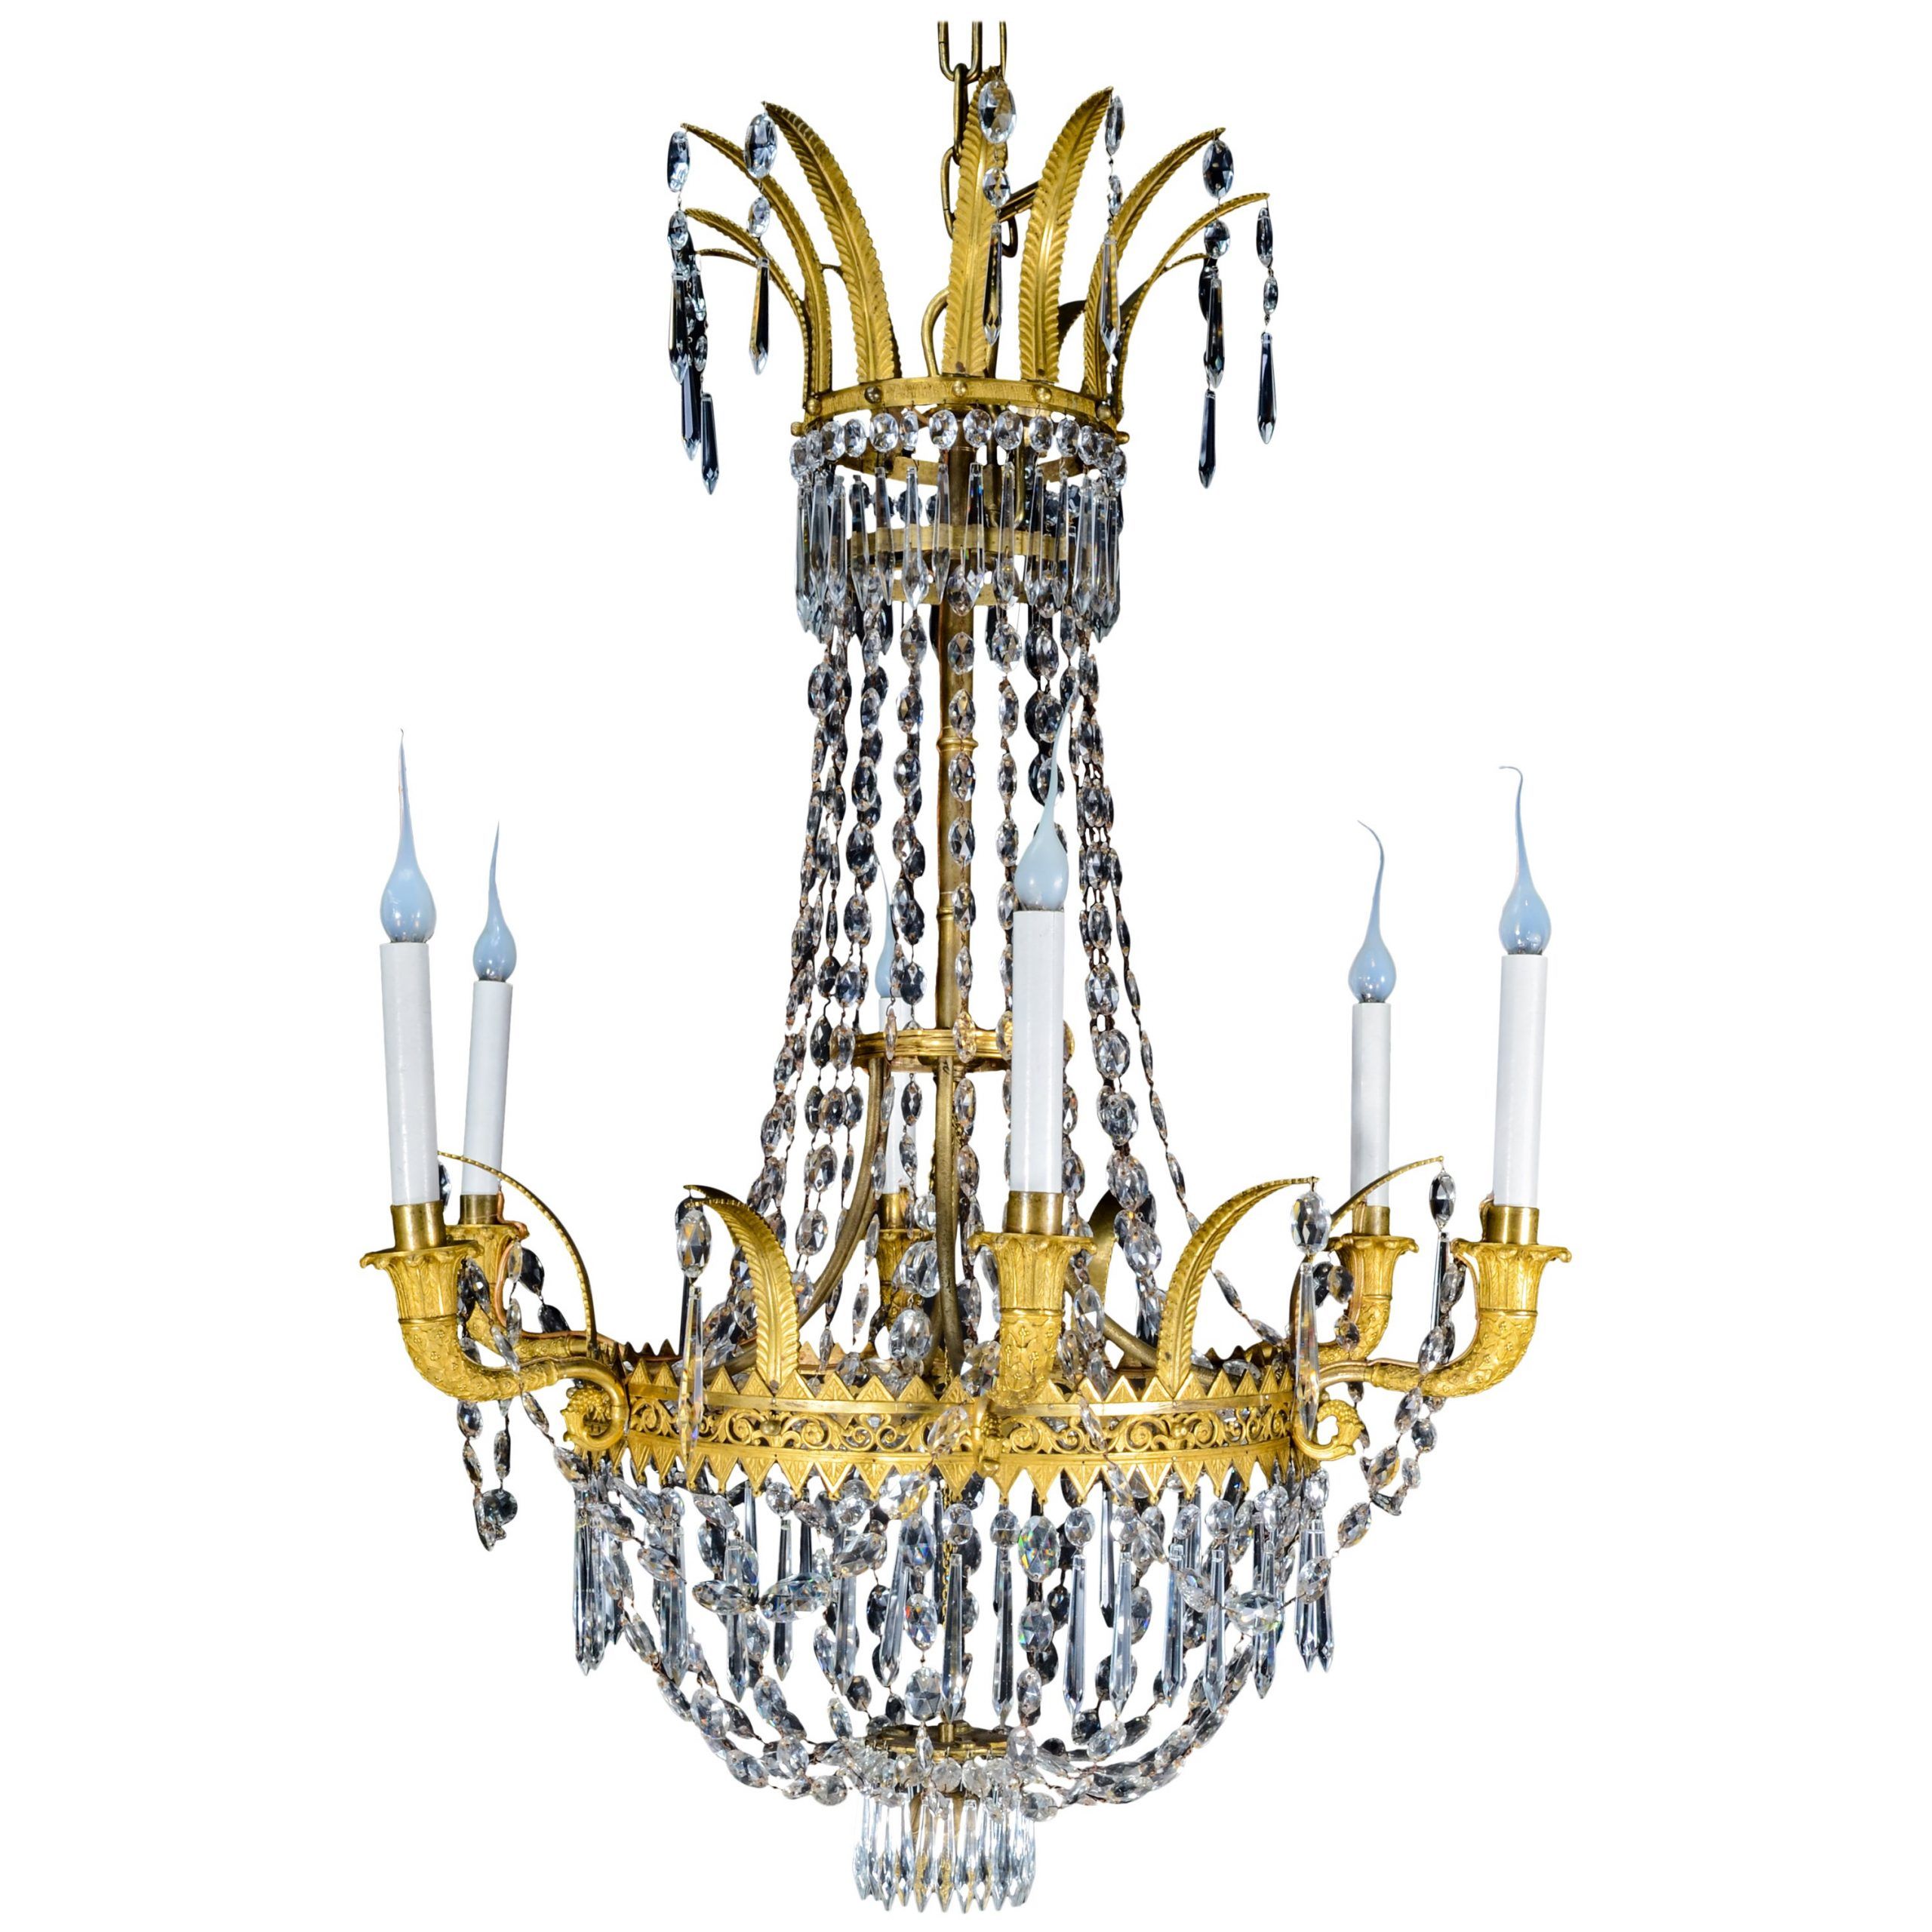 Gilt Bronze And Crystal Empire Style Chandelier For Sale For Most Up To Date Roman Bronze And Crystal Chandeliers (View 2 of 20)